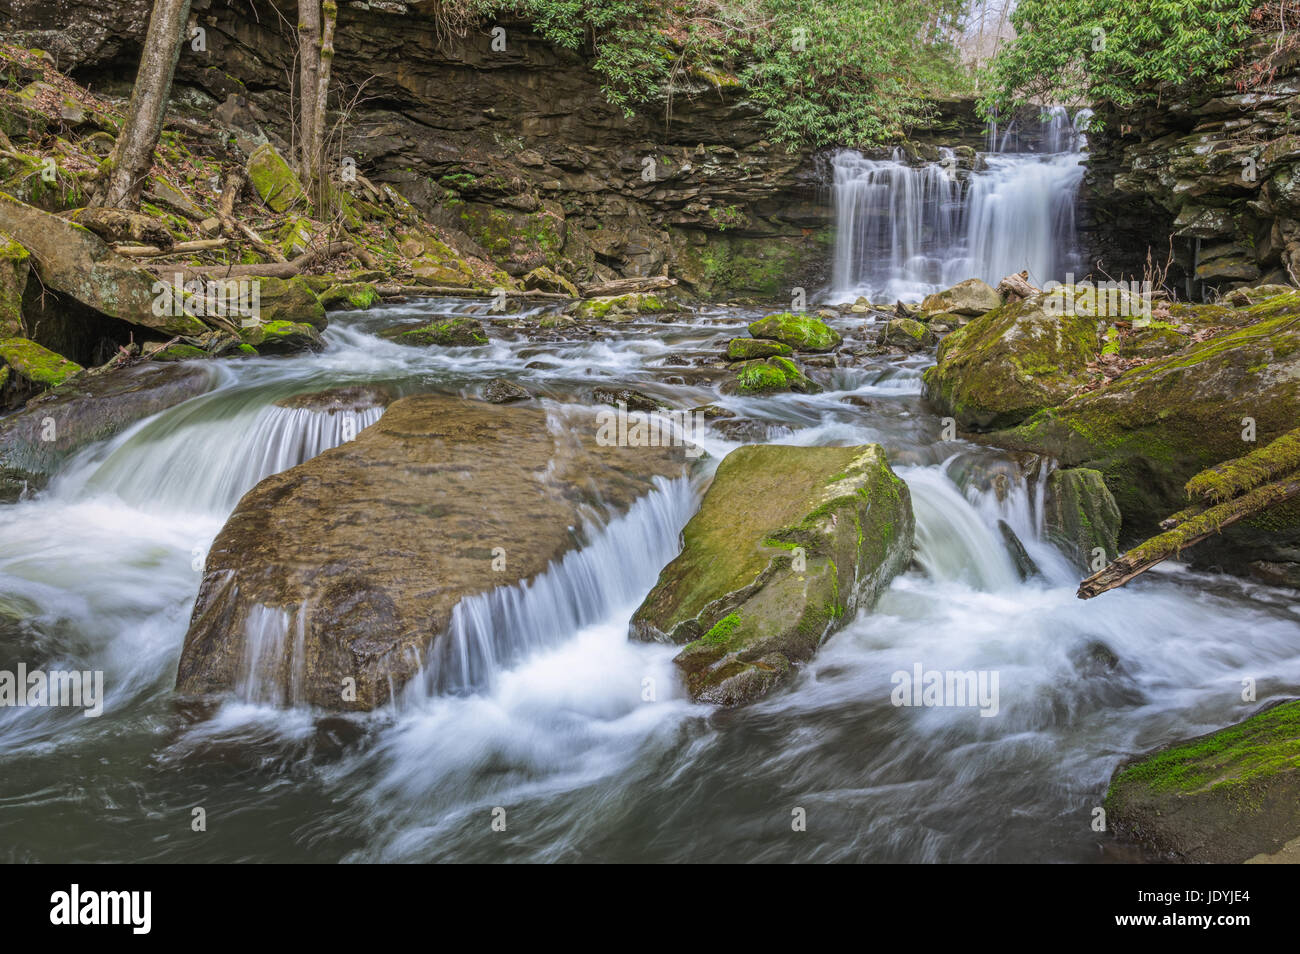 This waterfall is one of many large drops found on Arbuckle Creek in the New River Gorge of West Virginia. Stock Photo